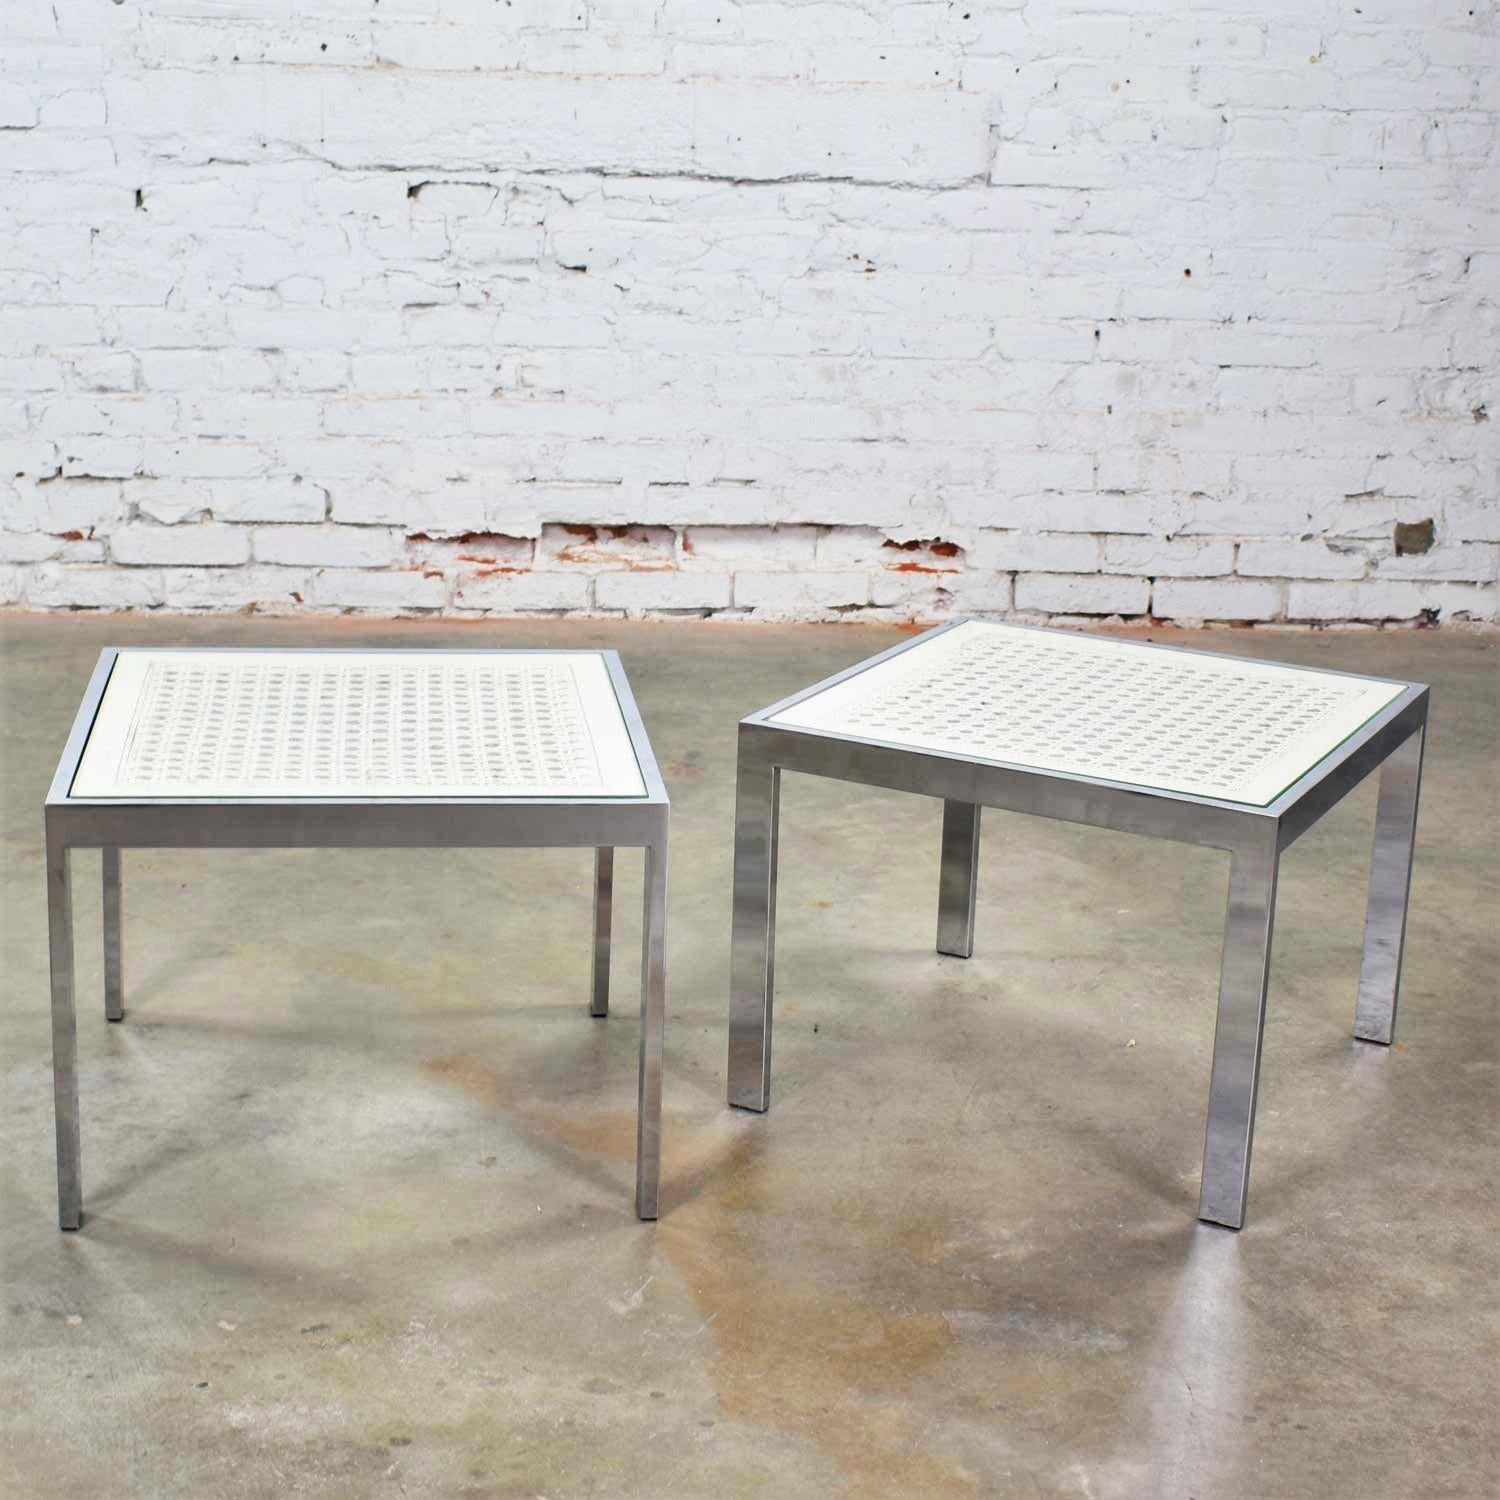 Handsome pair of square Mid-Century Modern to modern Parsons style side tables or end tables comprised of a rectangular chrome tube frame with a white painted cane and glass insert top. They are in wonderful vintage condition. We have given the cane